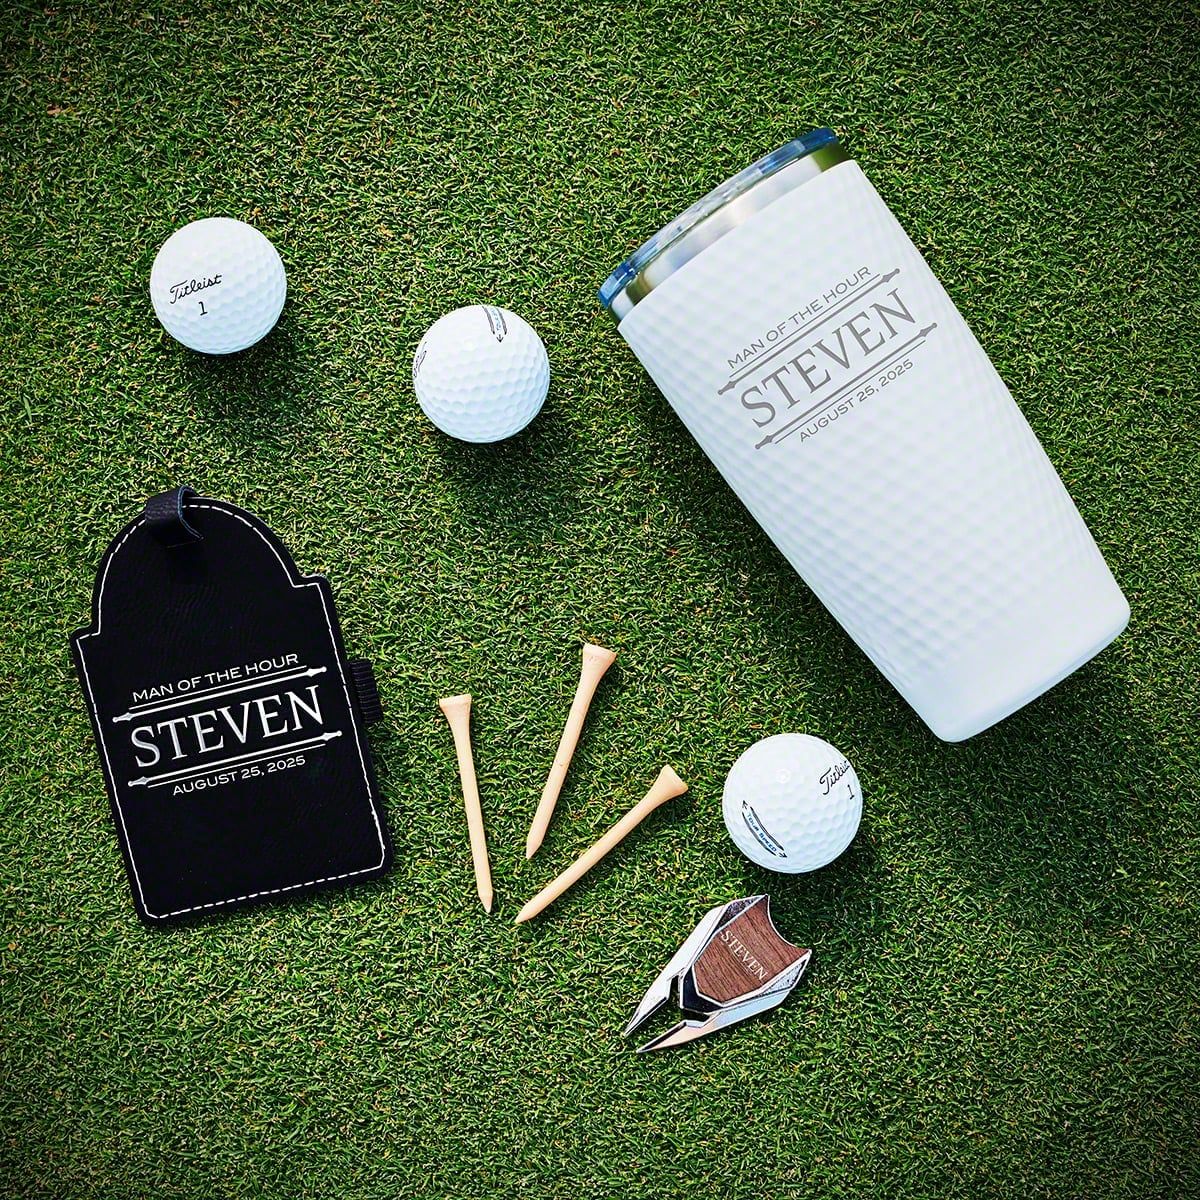 https://images.homewetbar.com/media/catalog/product/c/u/custom-engraved-golf-black-leather-tag-white-dimpled-coffee-tumbler-stanford-p-10852.jpg?store=default&image-type=image